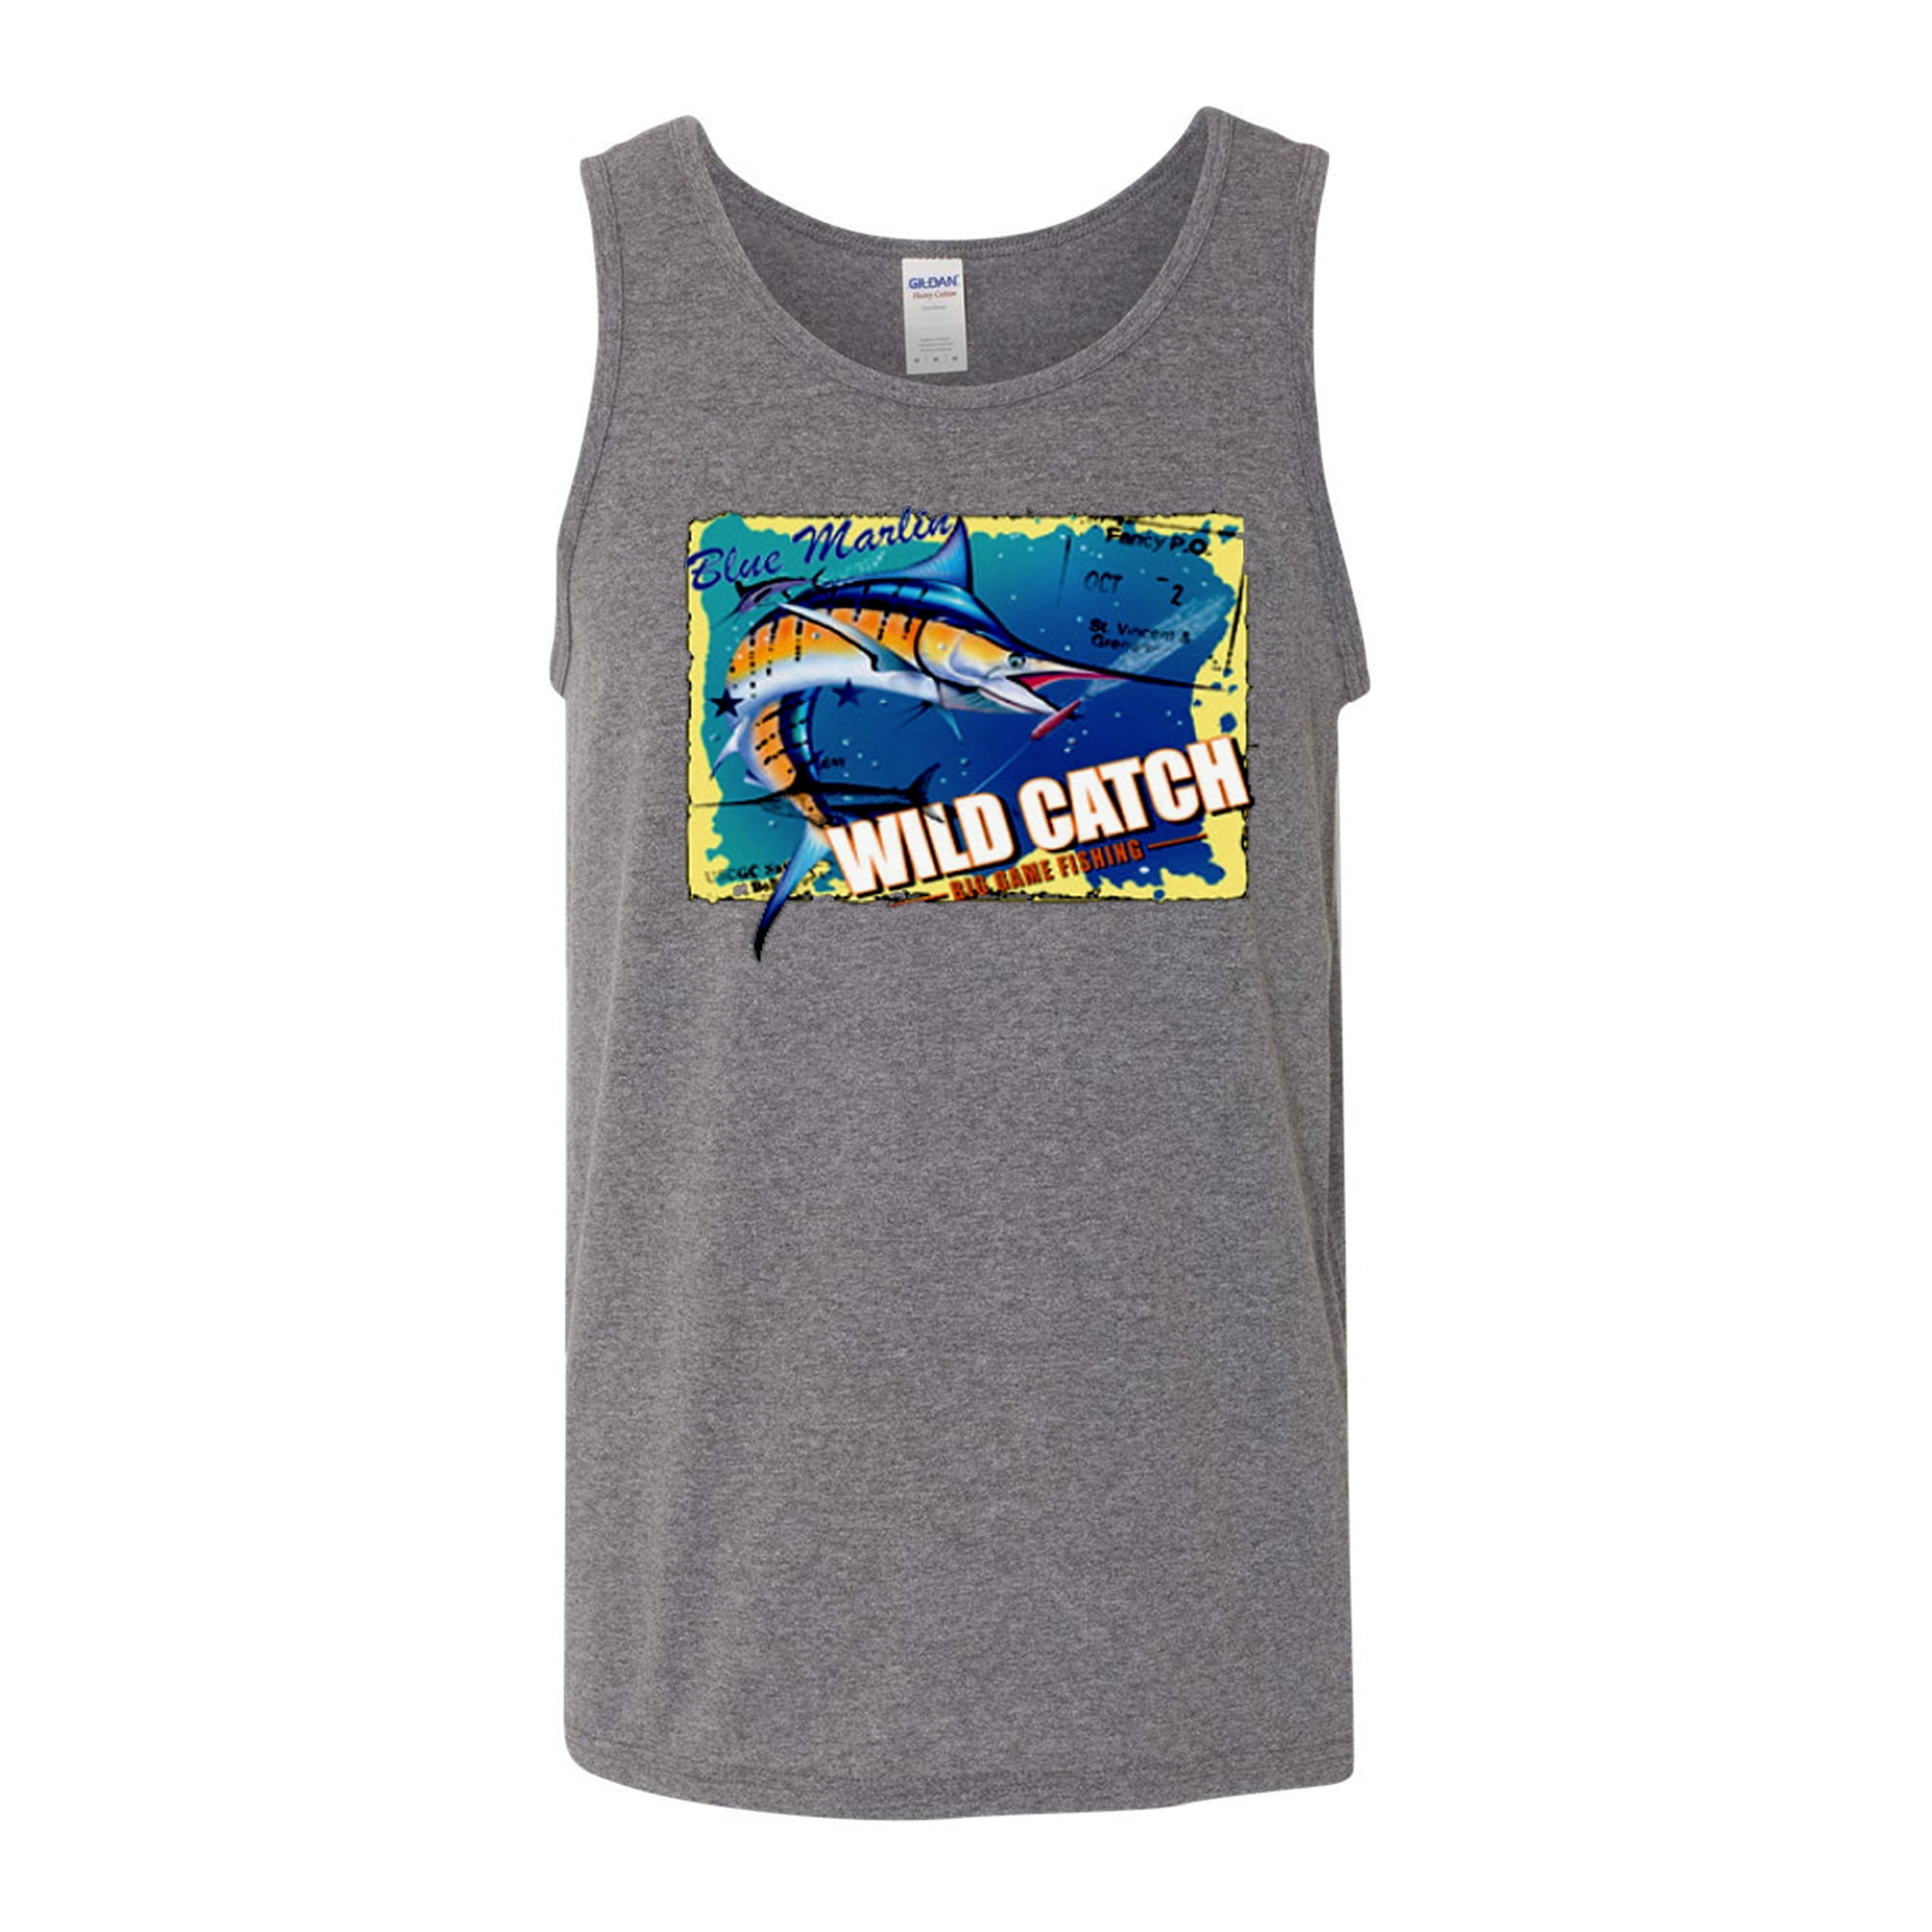 Blue Marlin Wild Catch Fishing Lovers Mens Tank Top, Navy Blue, Large